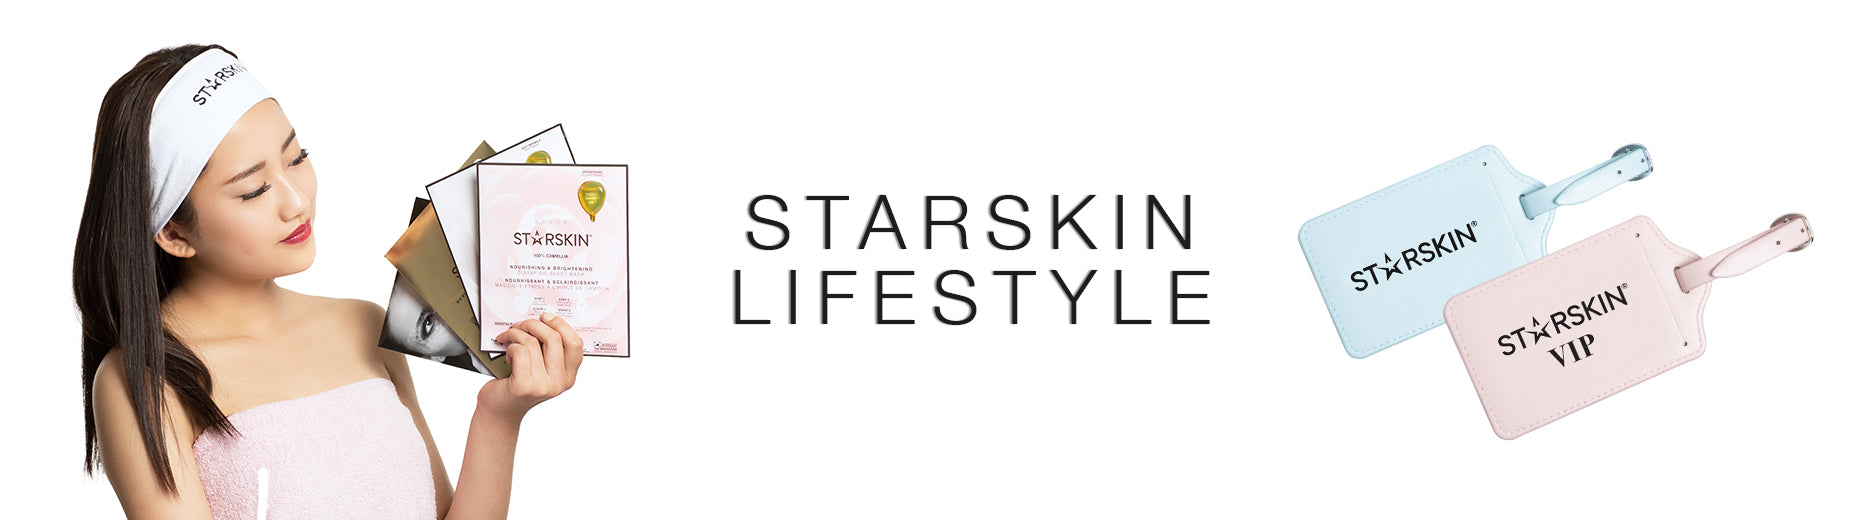 banner lifestyle showing model with starskin hairband and luggage tags